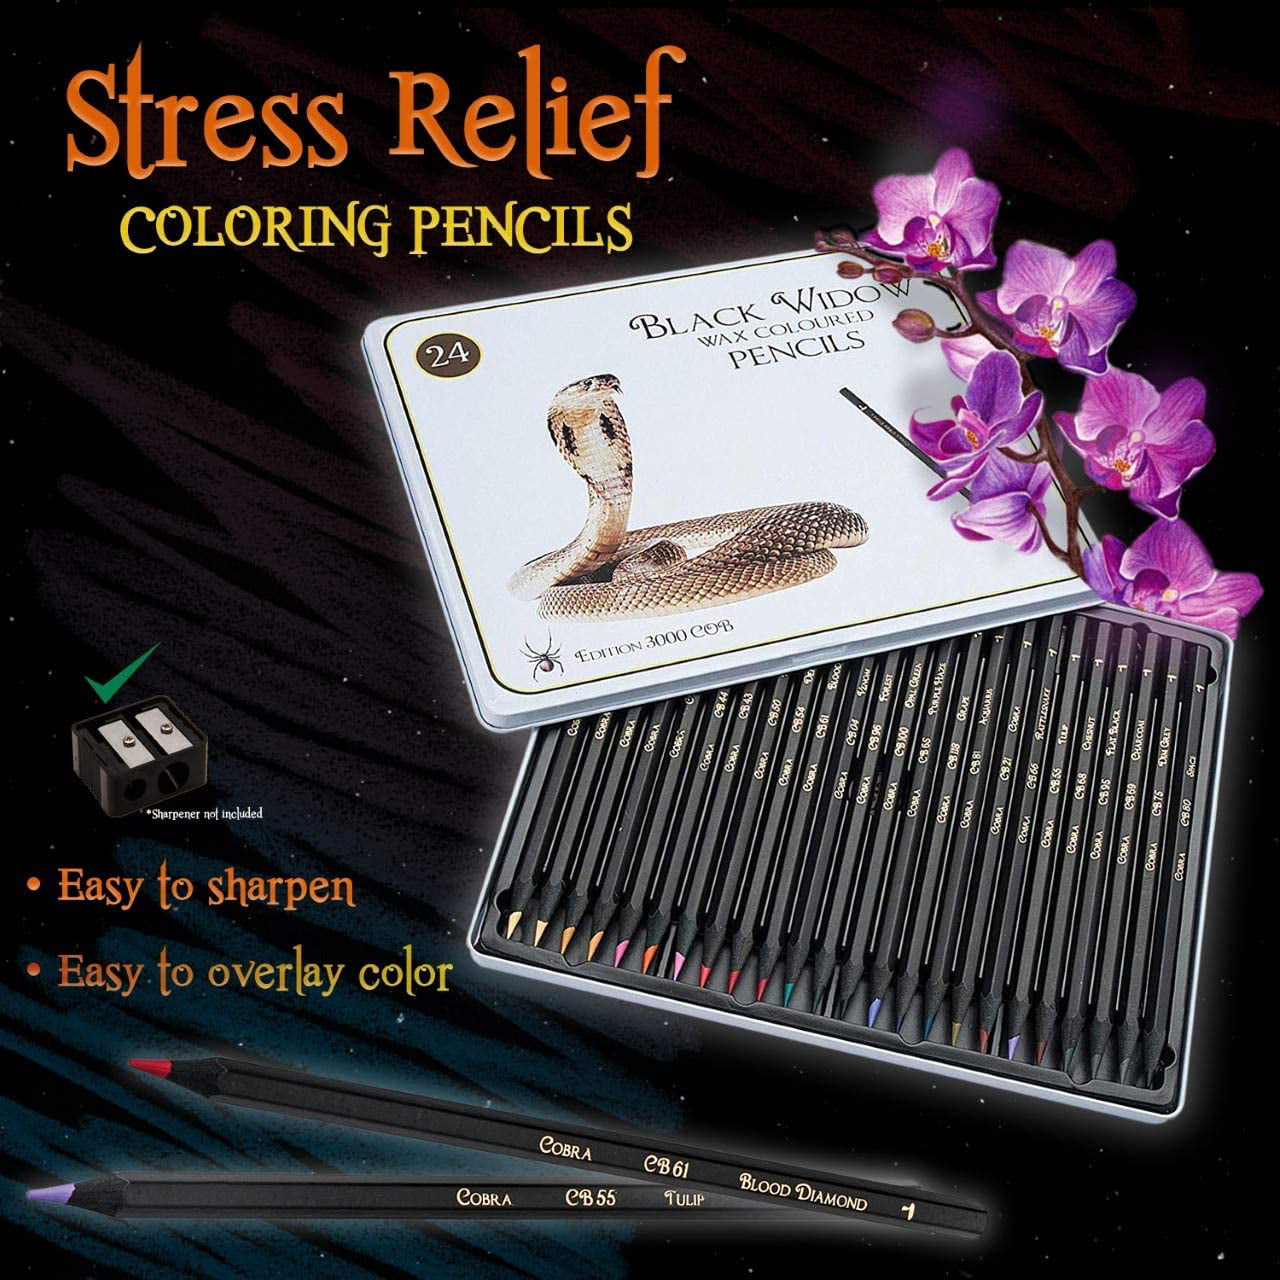 24 Coloring Pencils With Smooth Pigm... Black Widow Colored Pencils For Adults 